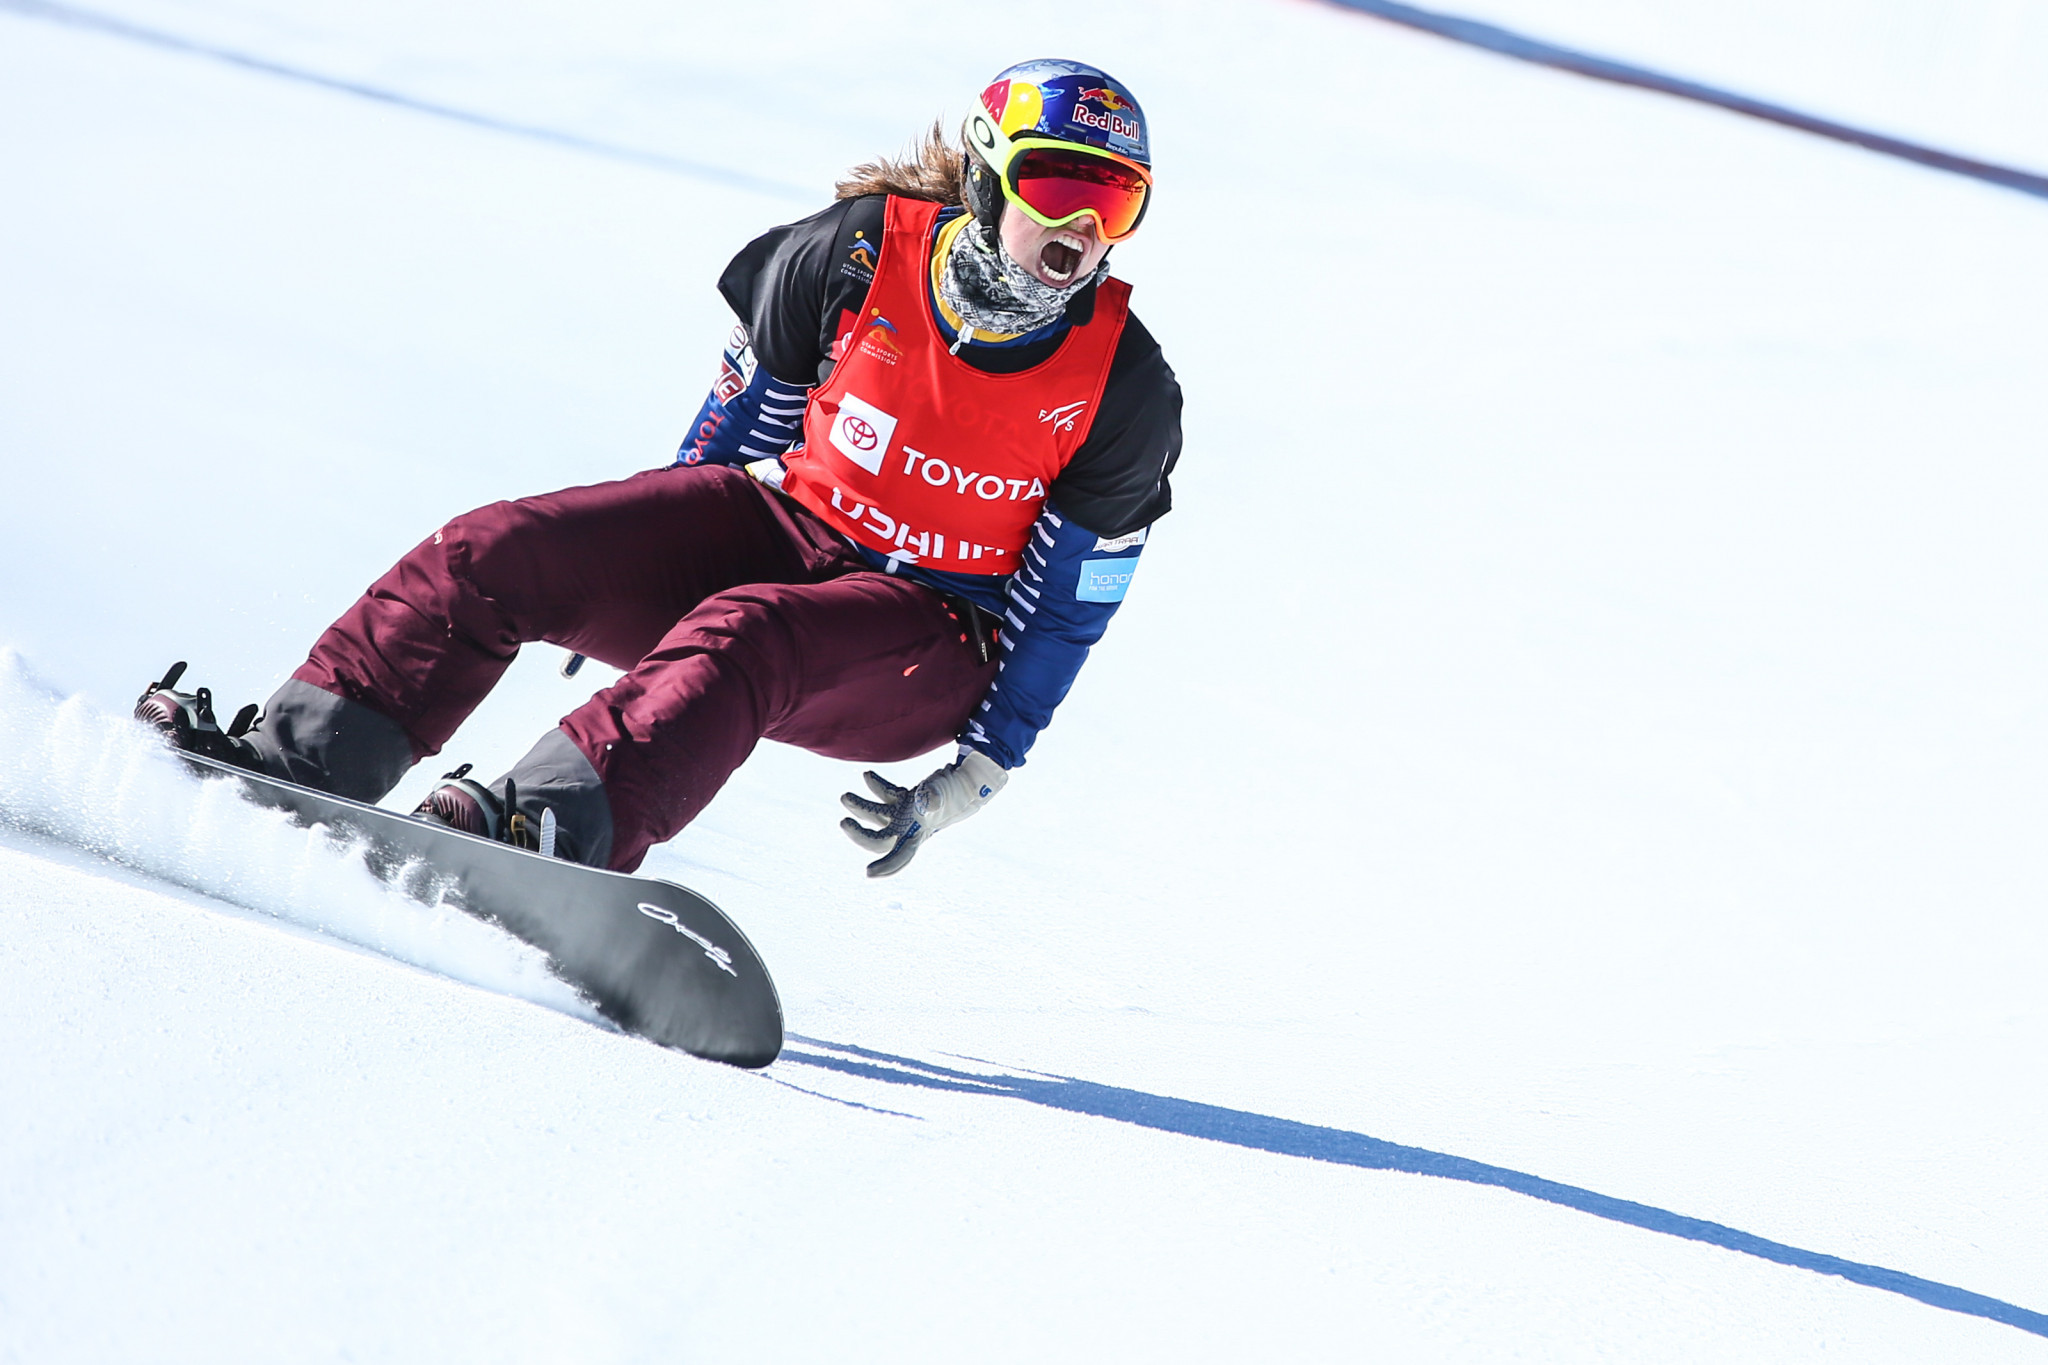 World champion Eva Samková of the Czech Republic moved level with American Lindsey Jacobellis at the top of the FIS Snowboard Cross World Cup rankings with victory in Spain ©Getty Images